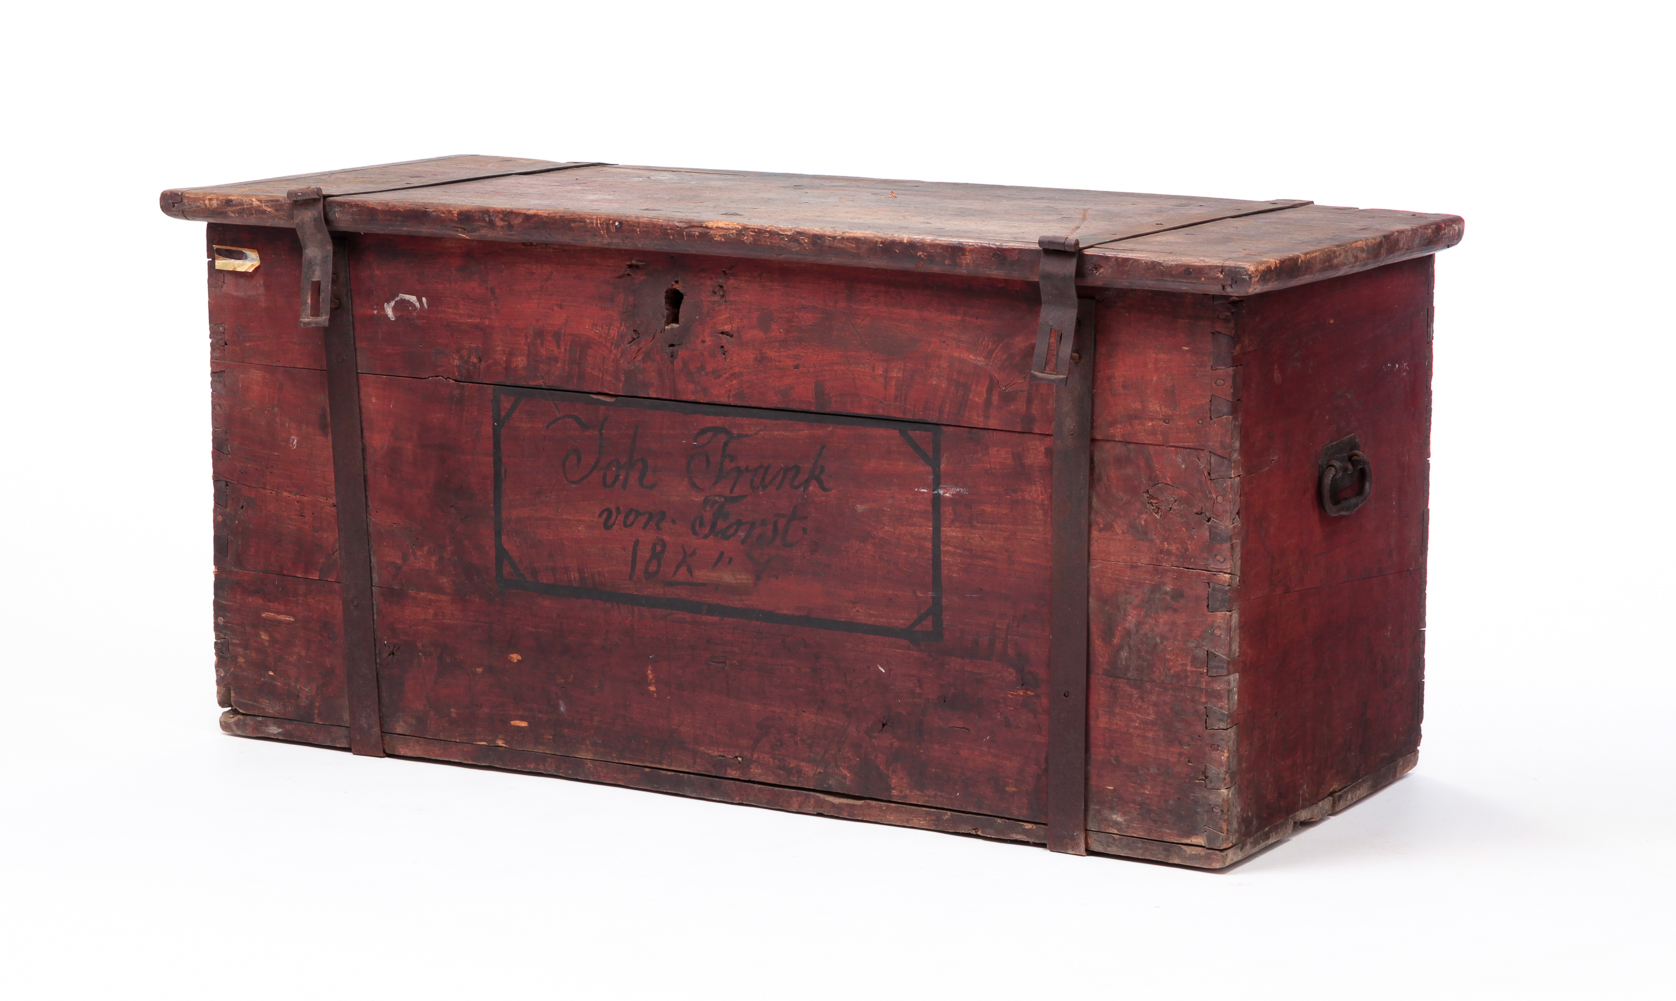 GERMAN PAINTED IMMIGRANTS CHEST.